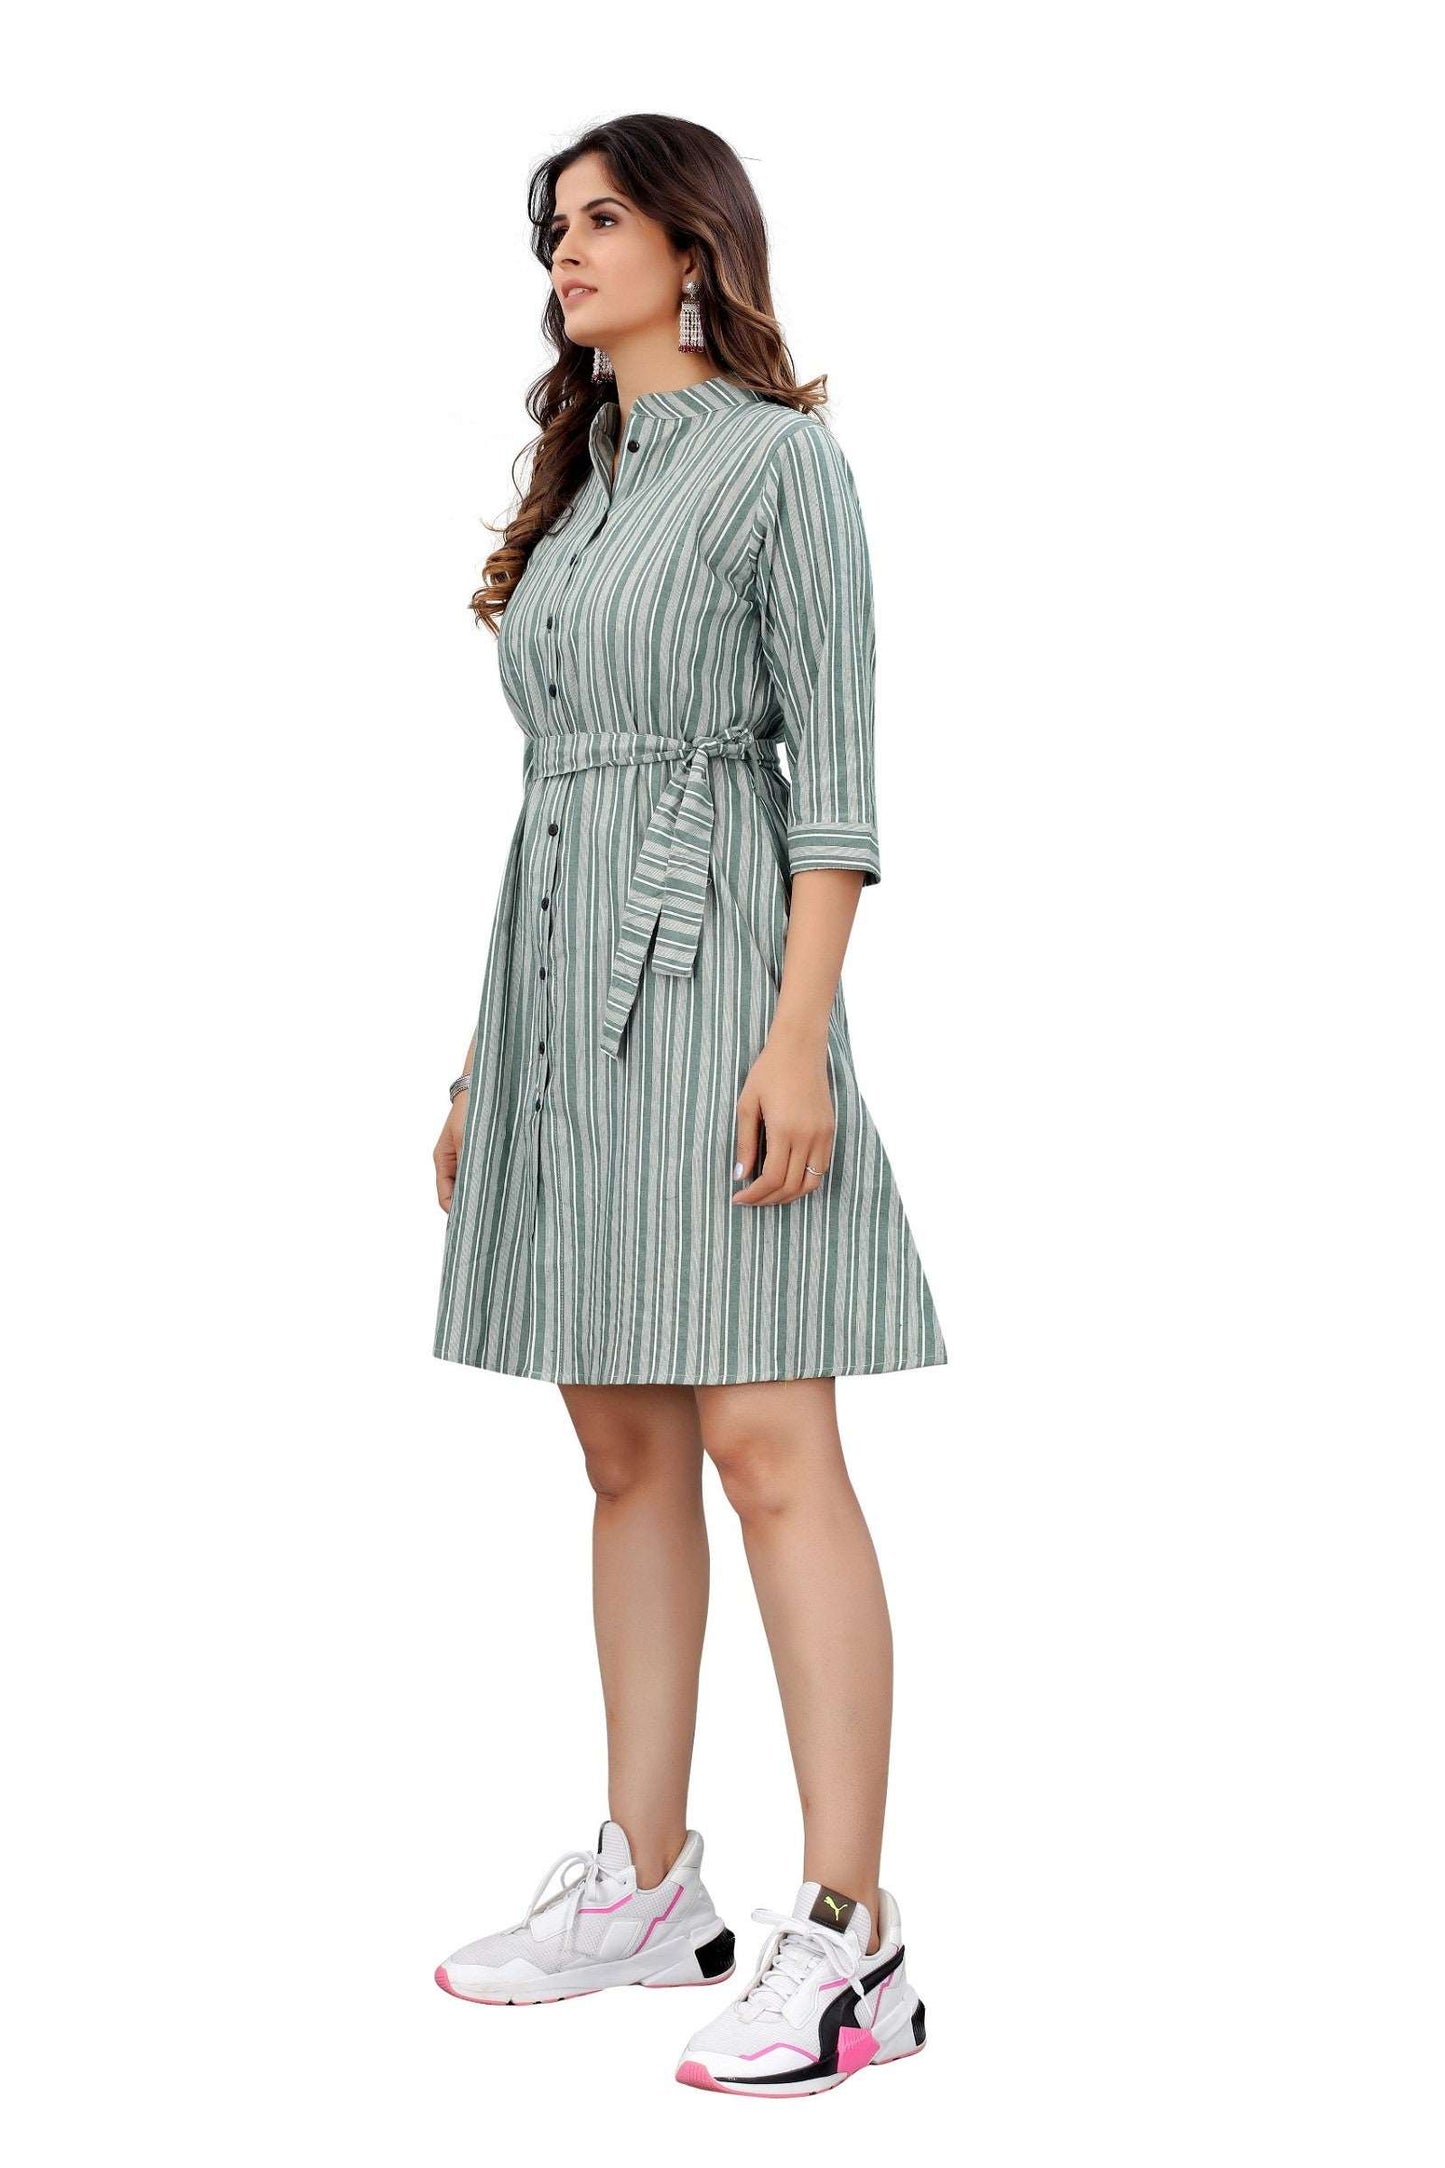 The model in the image is wearing Green Colour Cotton Printed Casual Wear Dress from Alice Milan. Crafted with the finest materials and impeccable attention to detail, the Dress looks premium, trendy, luxurious and offers unparalleled comfort. It’s a perfect clothing option for loungewear, resort wear, party wear or for an airport look. The woman in the image looks happy, and confident with her style statement putting a happy smile on her face.